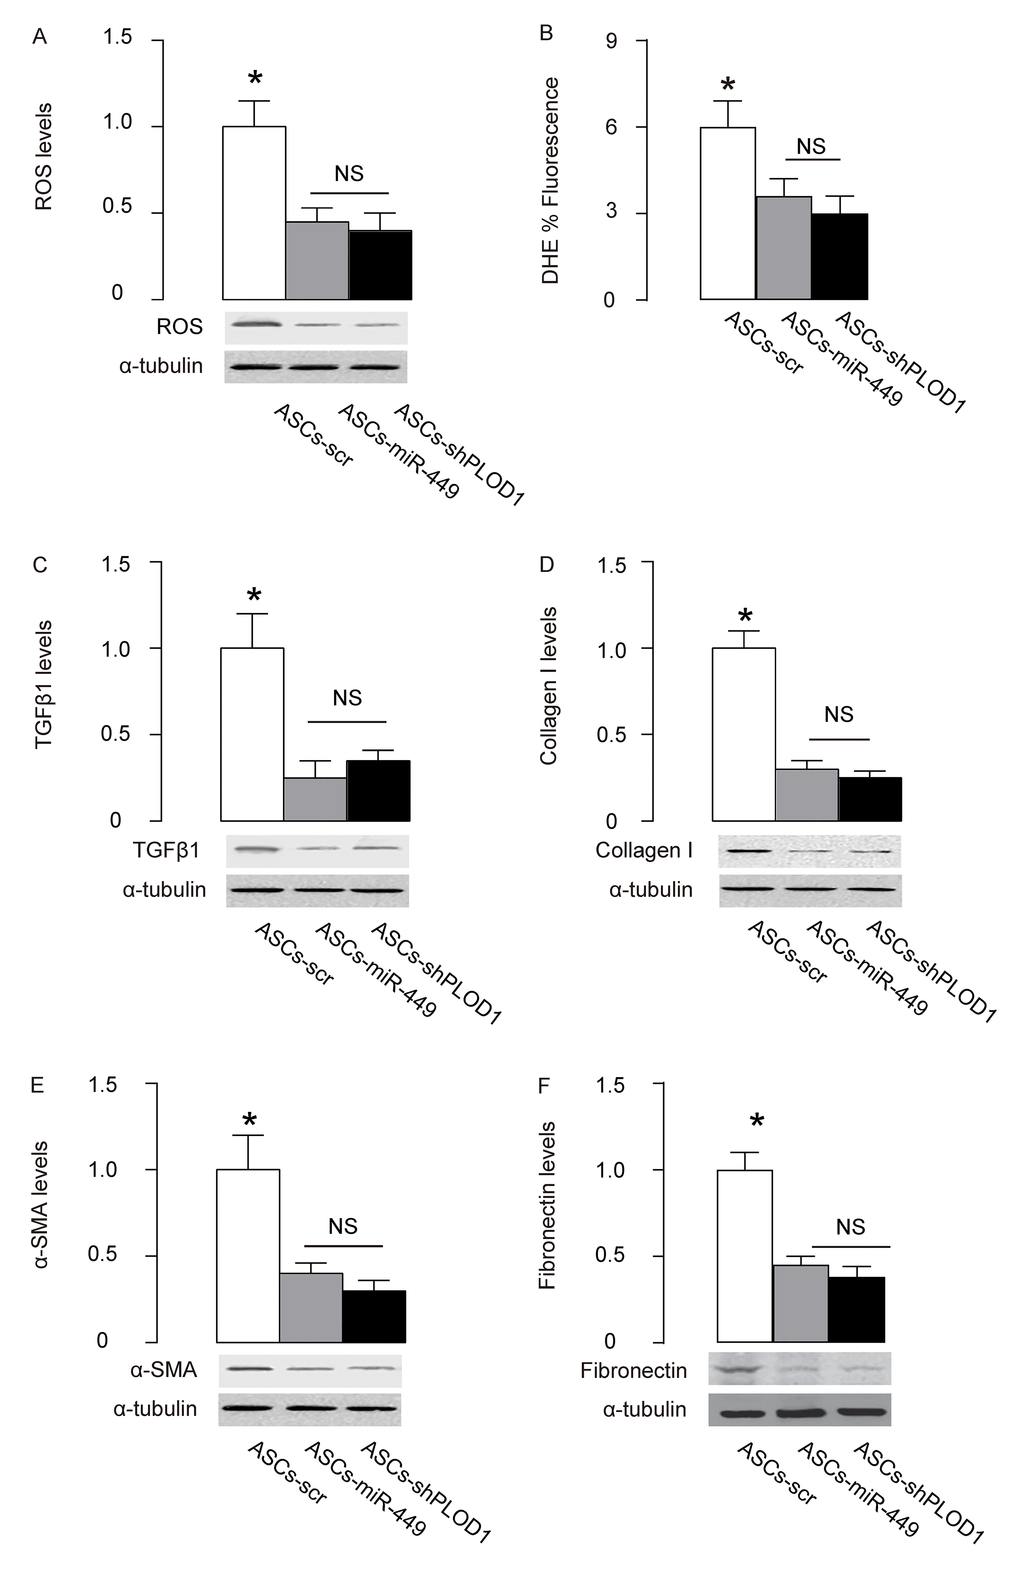 Mechanisms underlying the improved anti-fibrotic potential by PLOD1 suppression in ASCs. (A) Western blotting for ROS. (B) DHE assay. (C-F) Western blotting for TGFβ1 (C), Collagen I (D), α-SMA (E) and fibronectin (F), at the site of the skin injury. *p